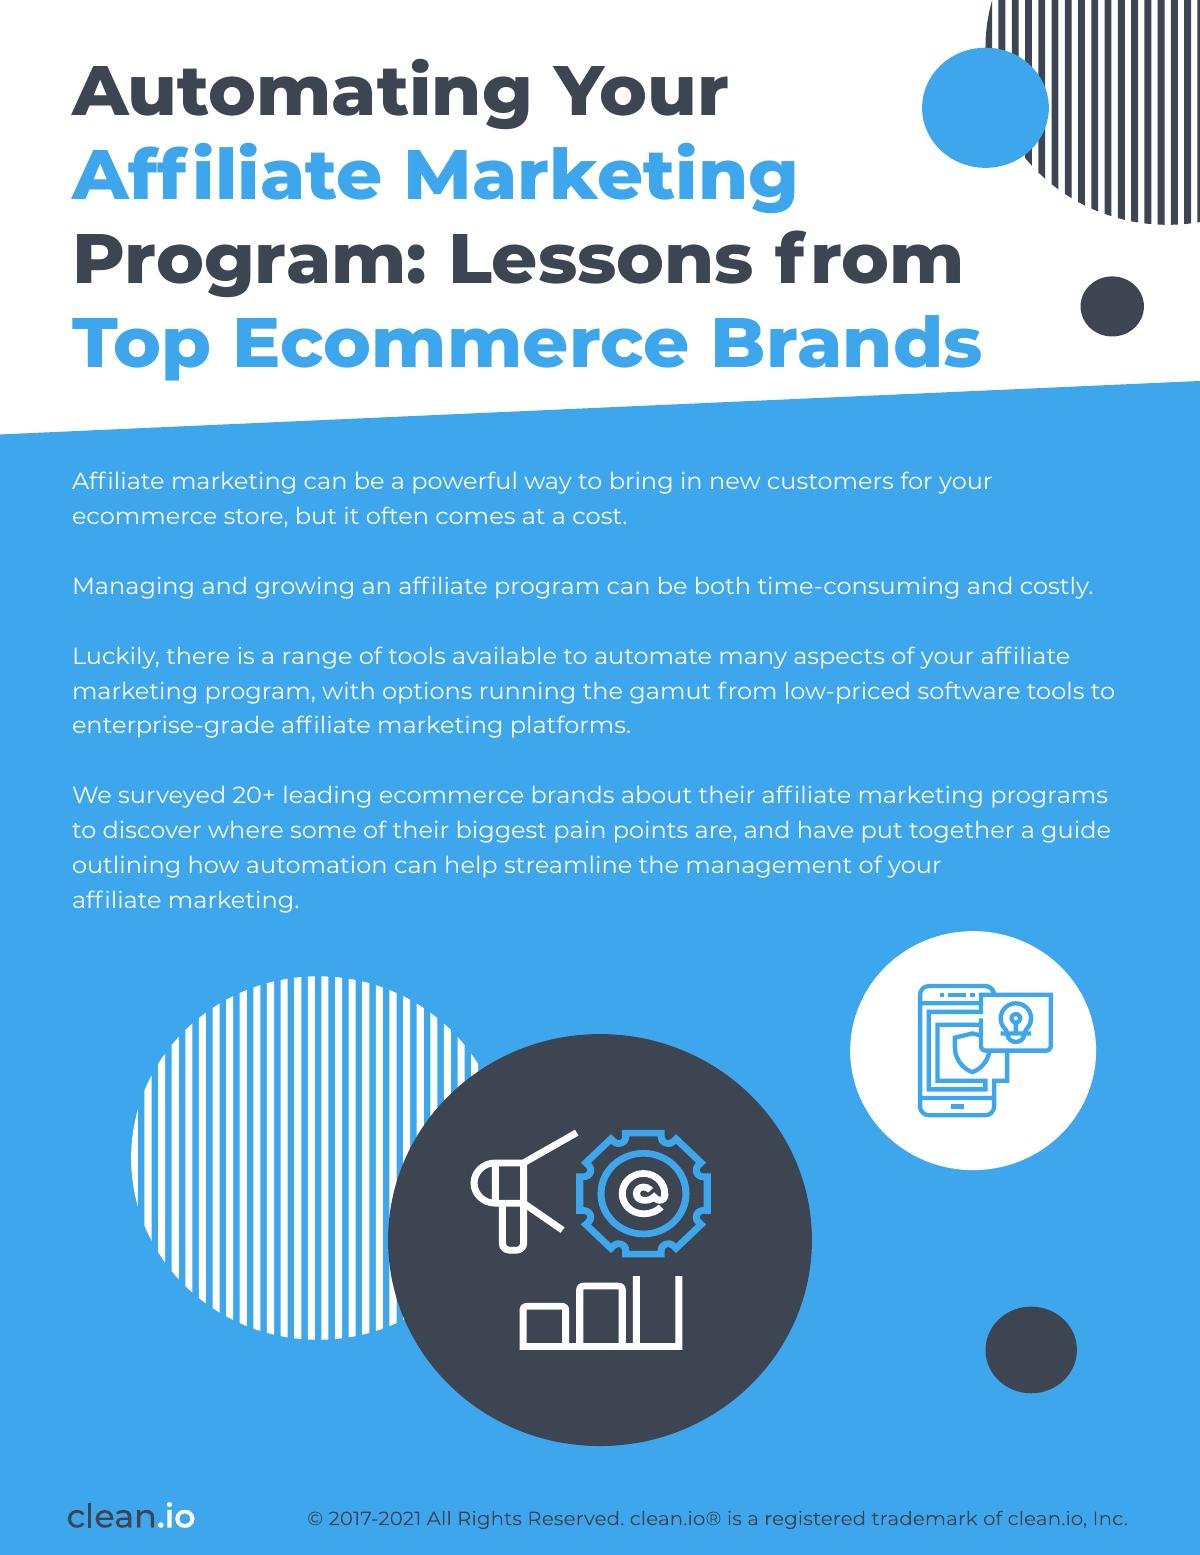 Automating Your Affiliate Marketing Program: Lessons from Top Ecommerce Brands